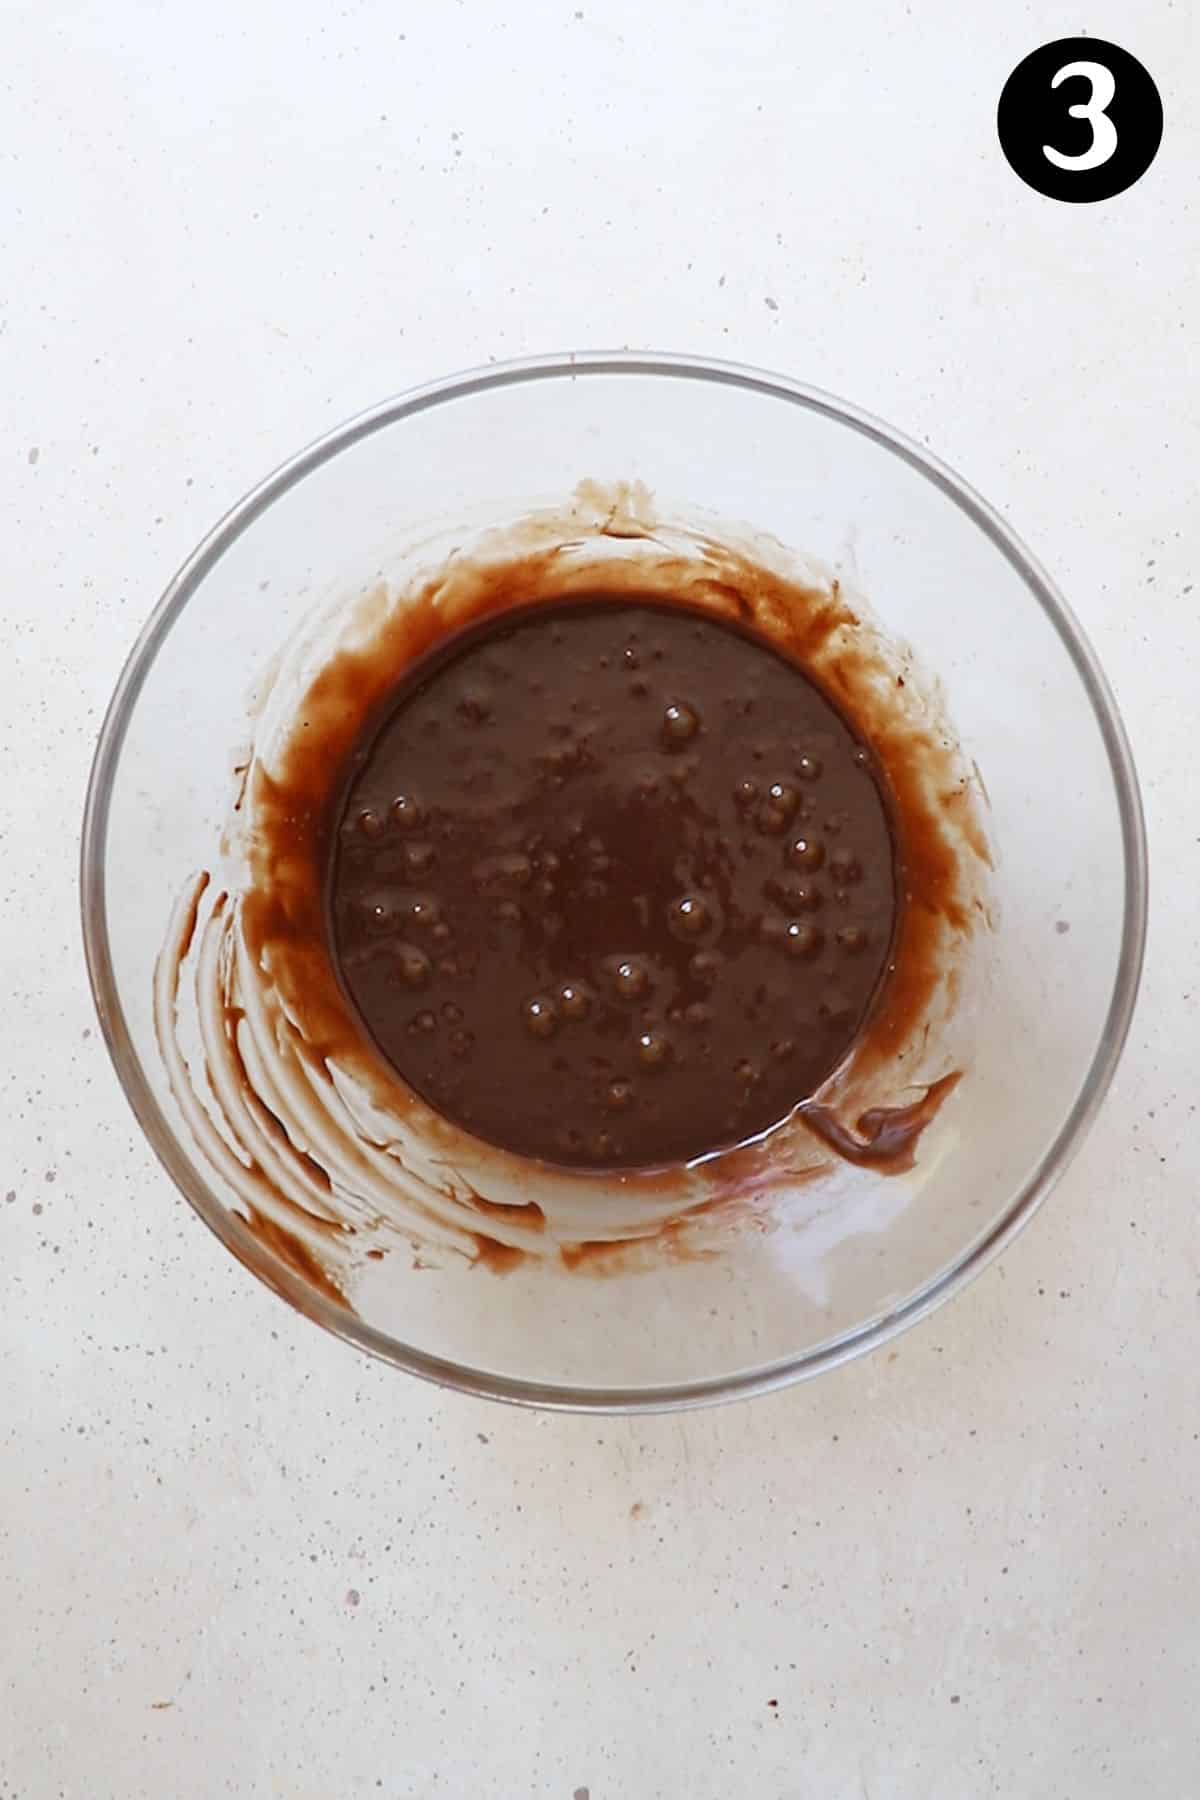 melted chocolate mixture in a bowl.